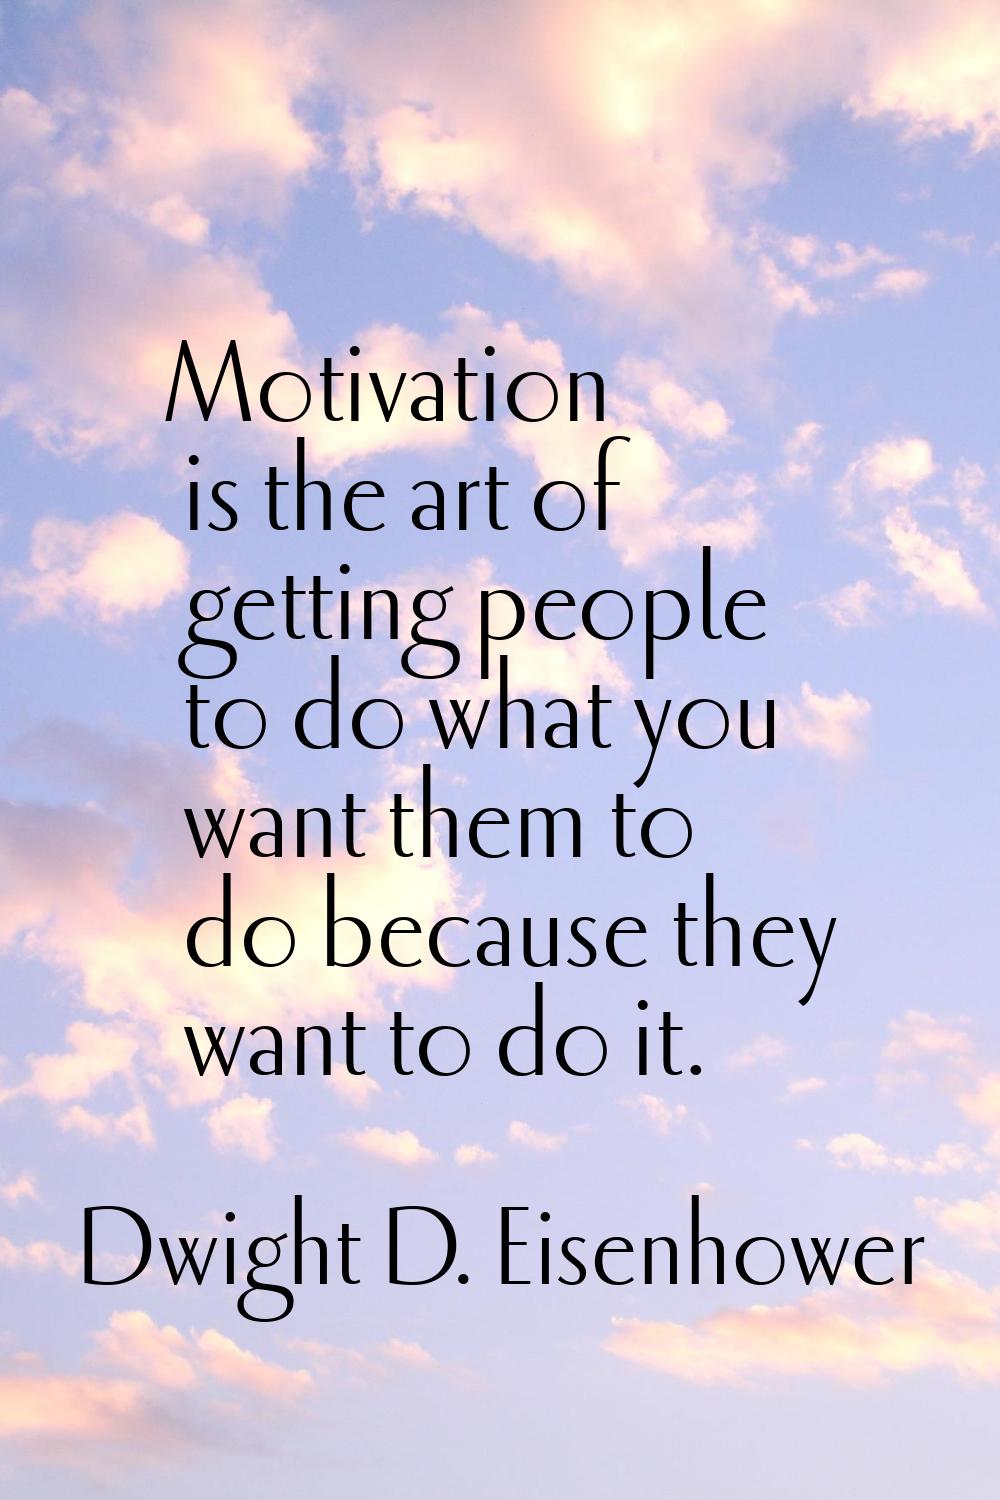 Motivation is the art of getting people to do what you want them to do because they want to do it.